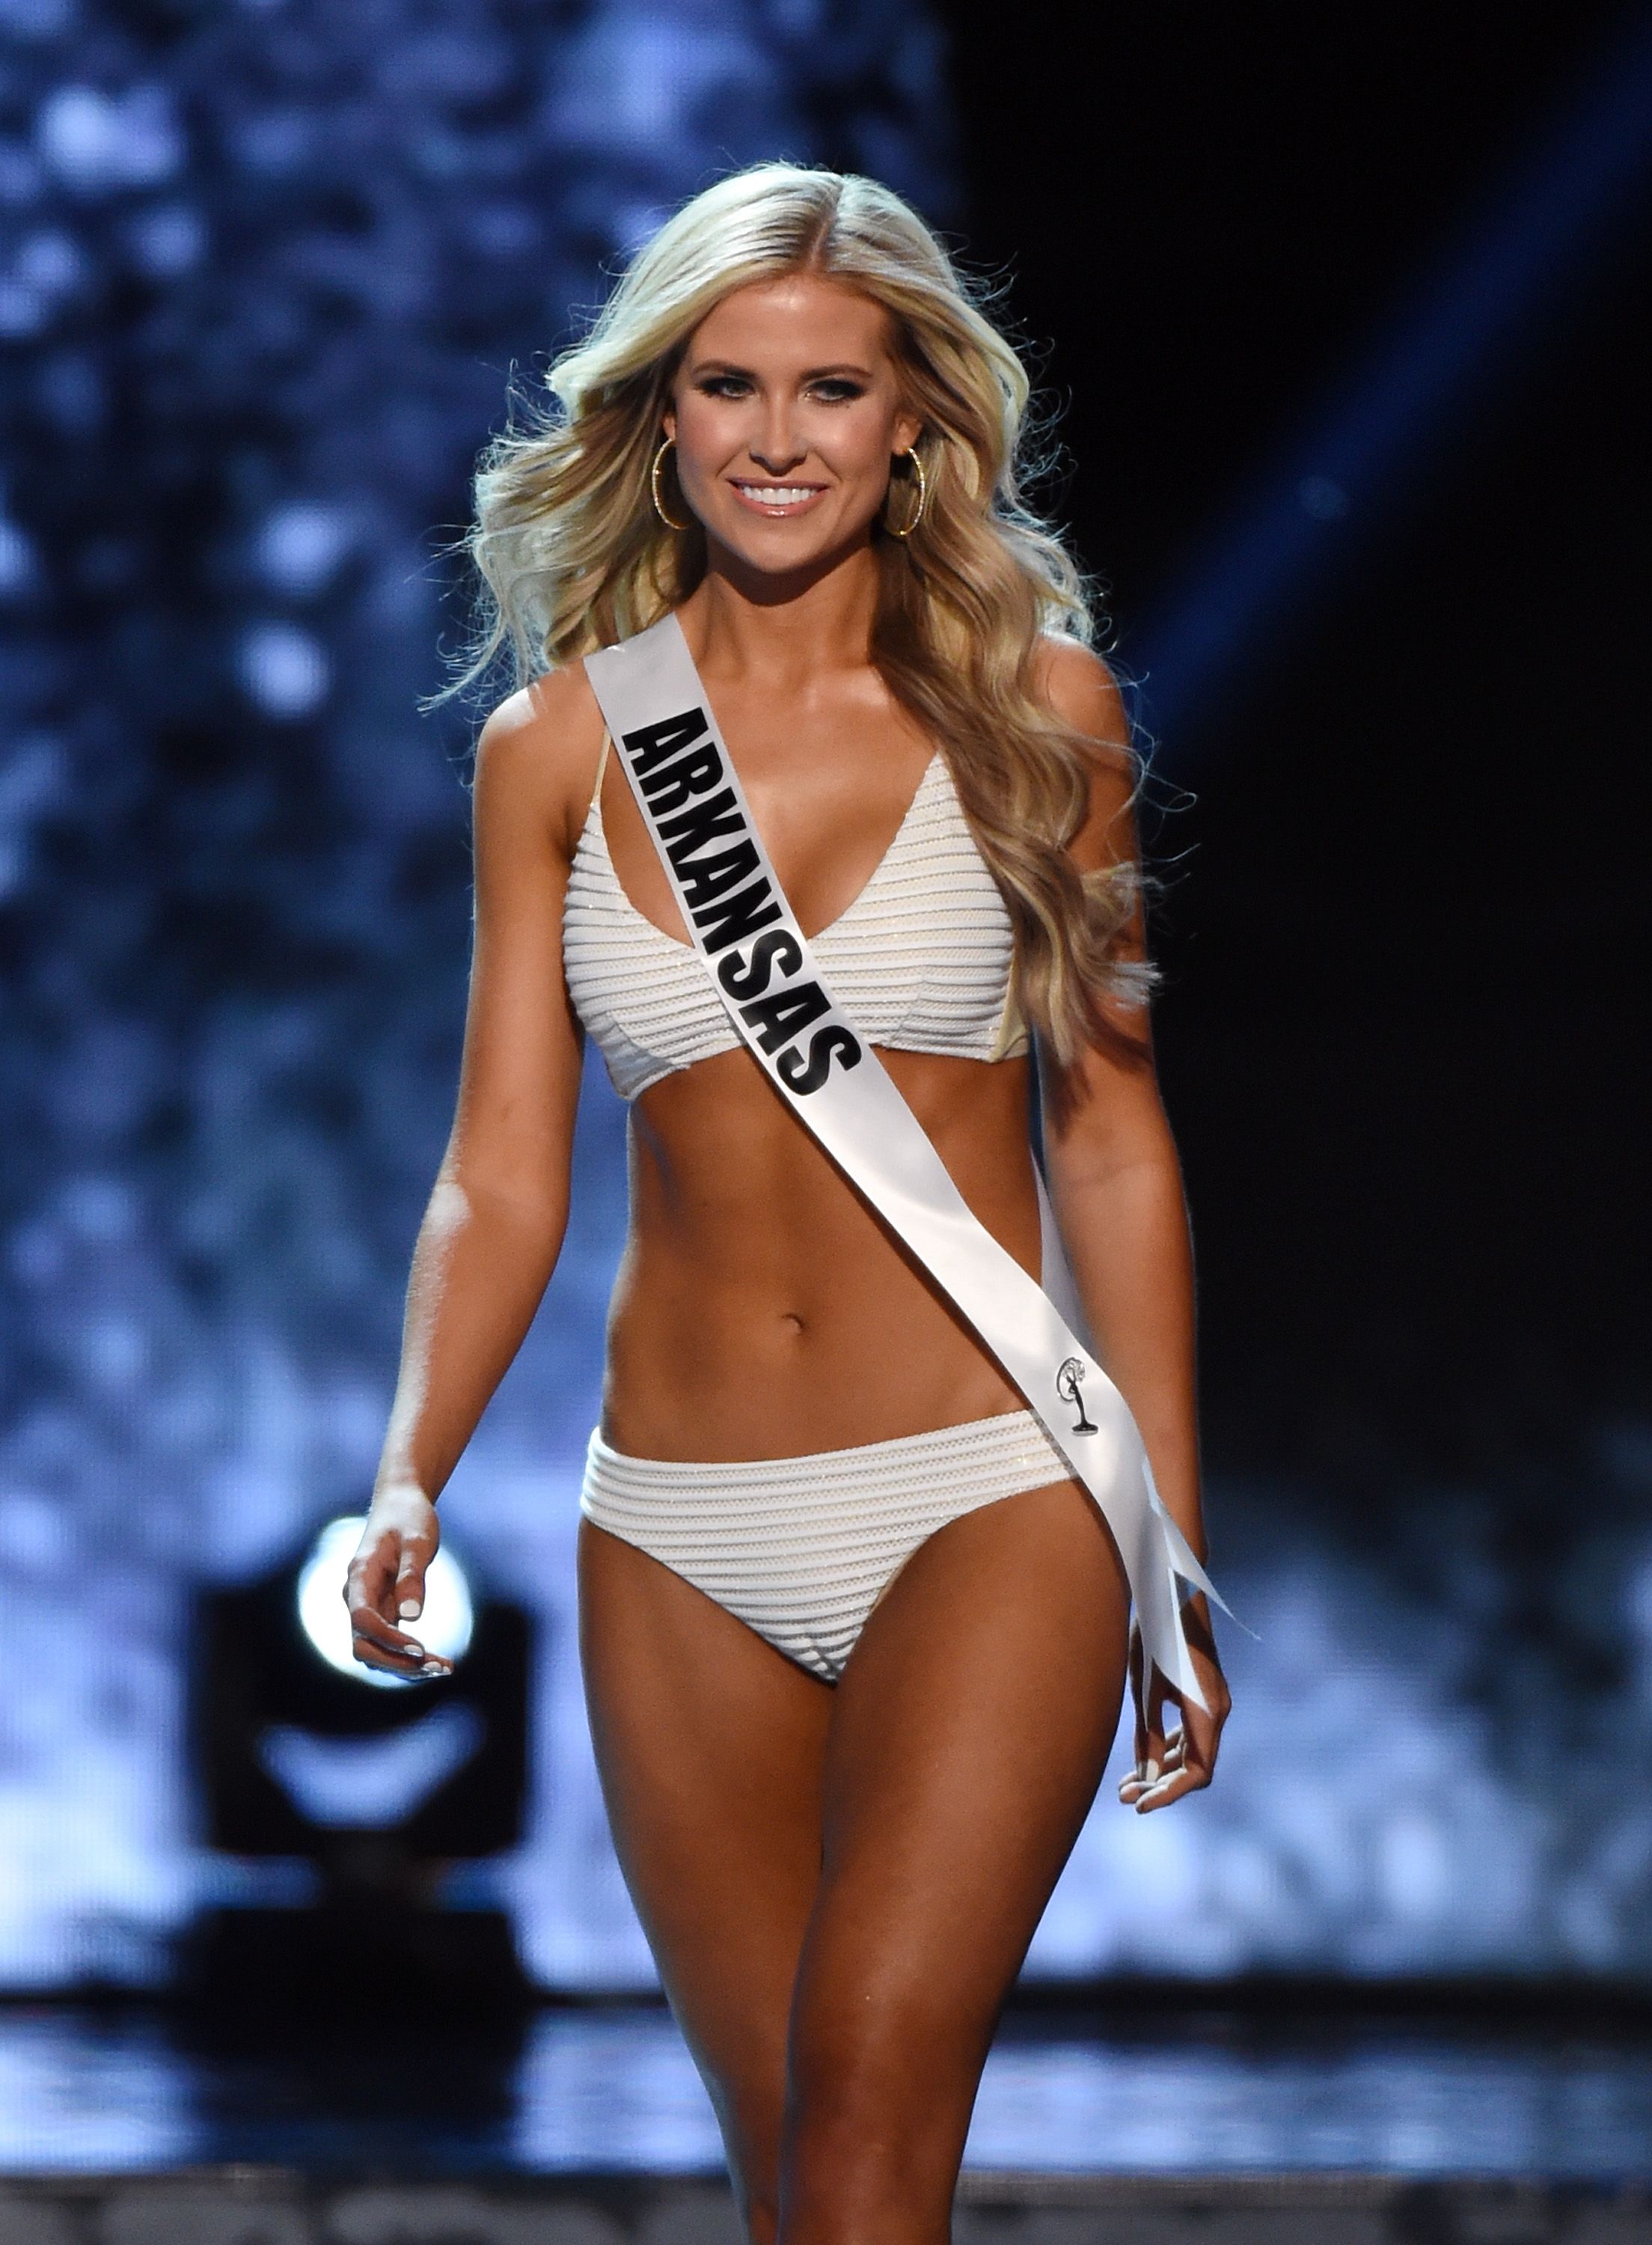 Miss America Pageant Swimsuit Camel Toe